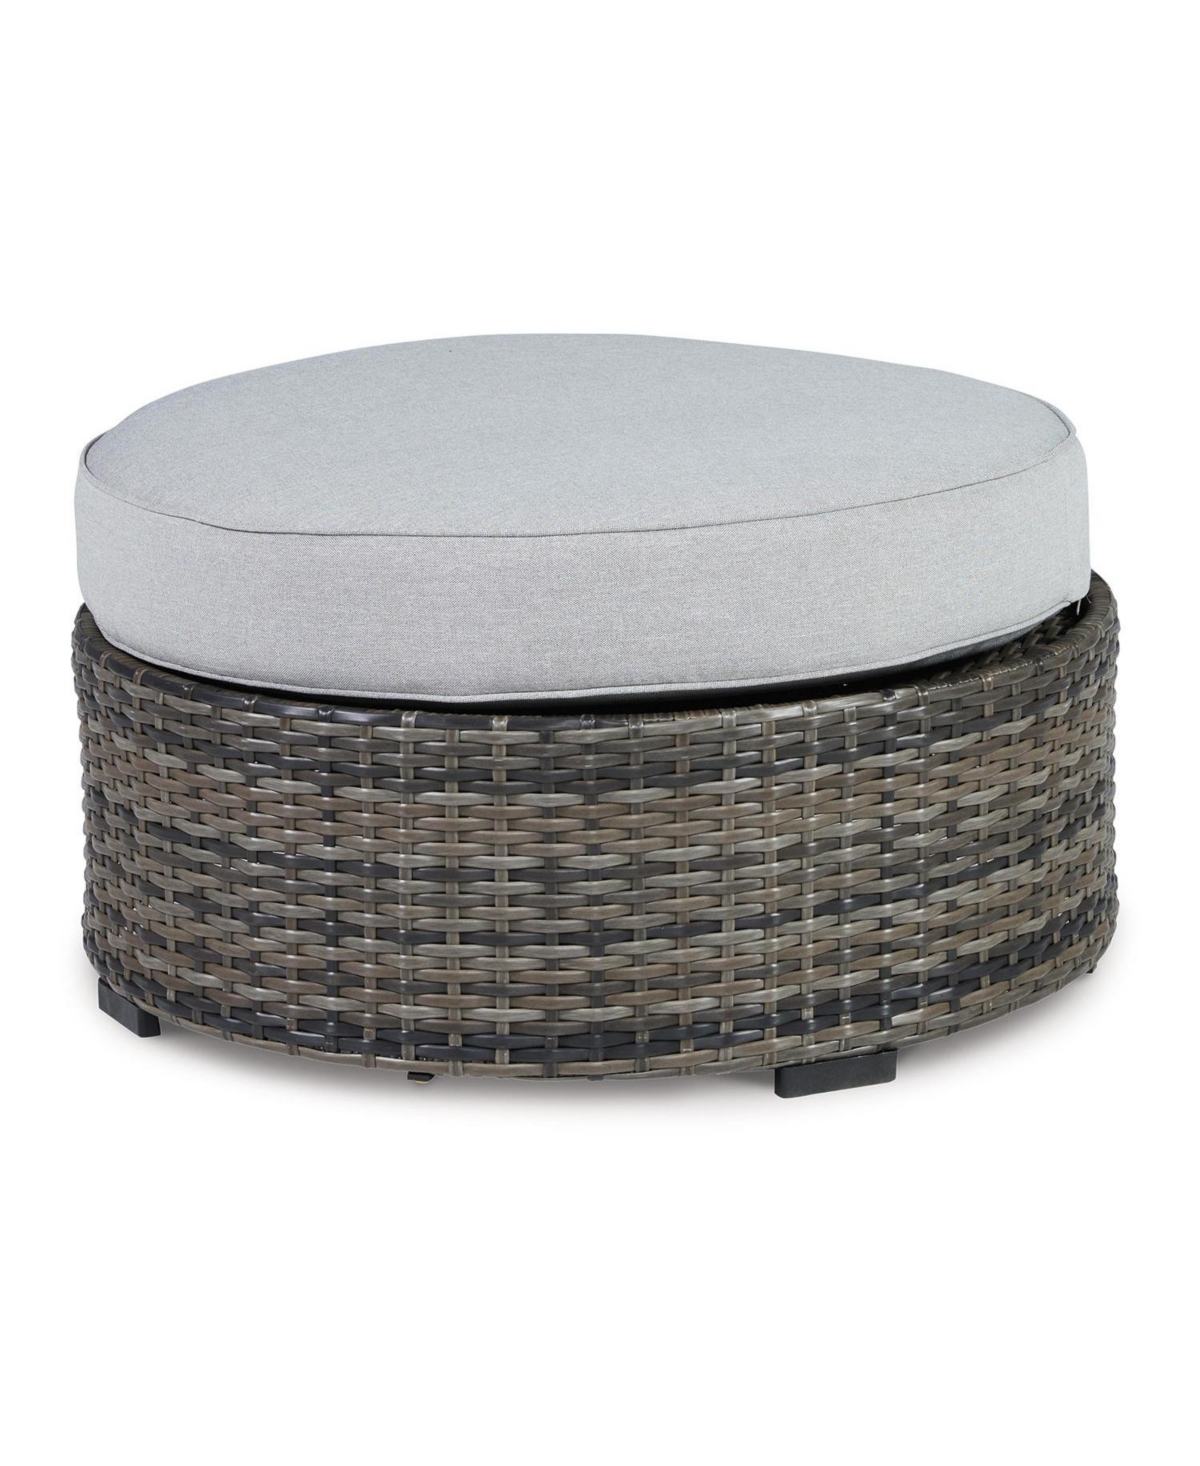 Signature Design By Ashley Harbor Court Ottoman With Cushion In Gray